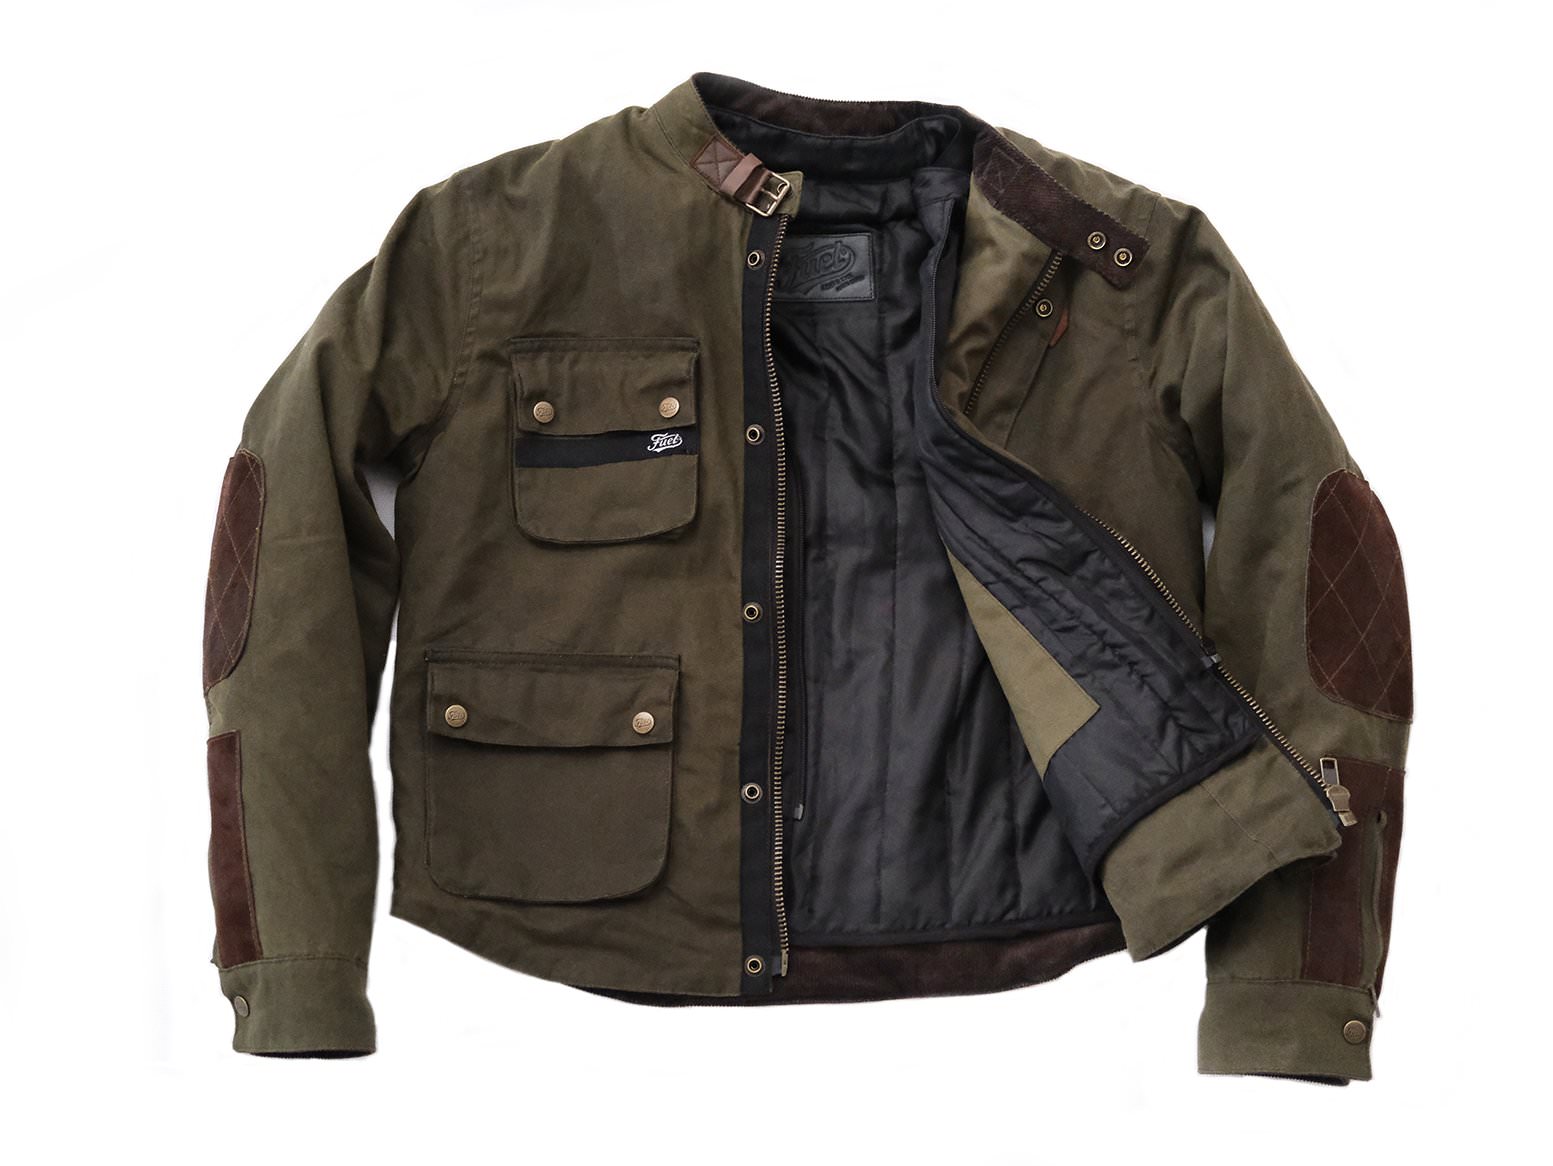 Fuel Division 2 Jacket – A Classic Design With Modern Protection